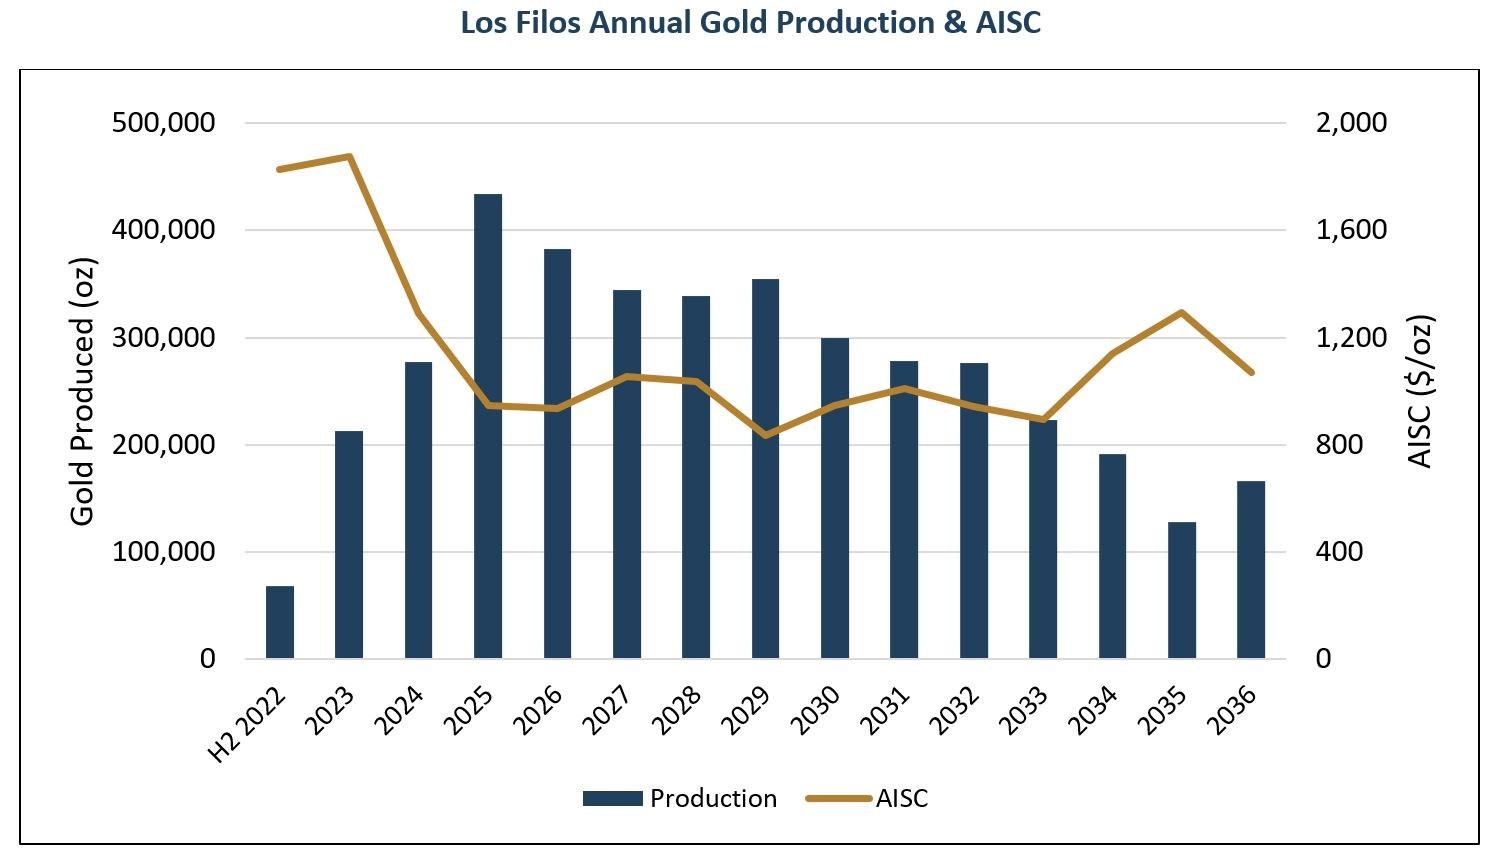 Los Filos Annual Gold Production & AISC (CNW Group/Equinox Gold Corp.)